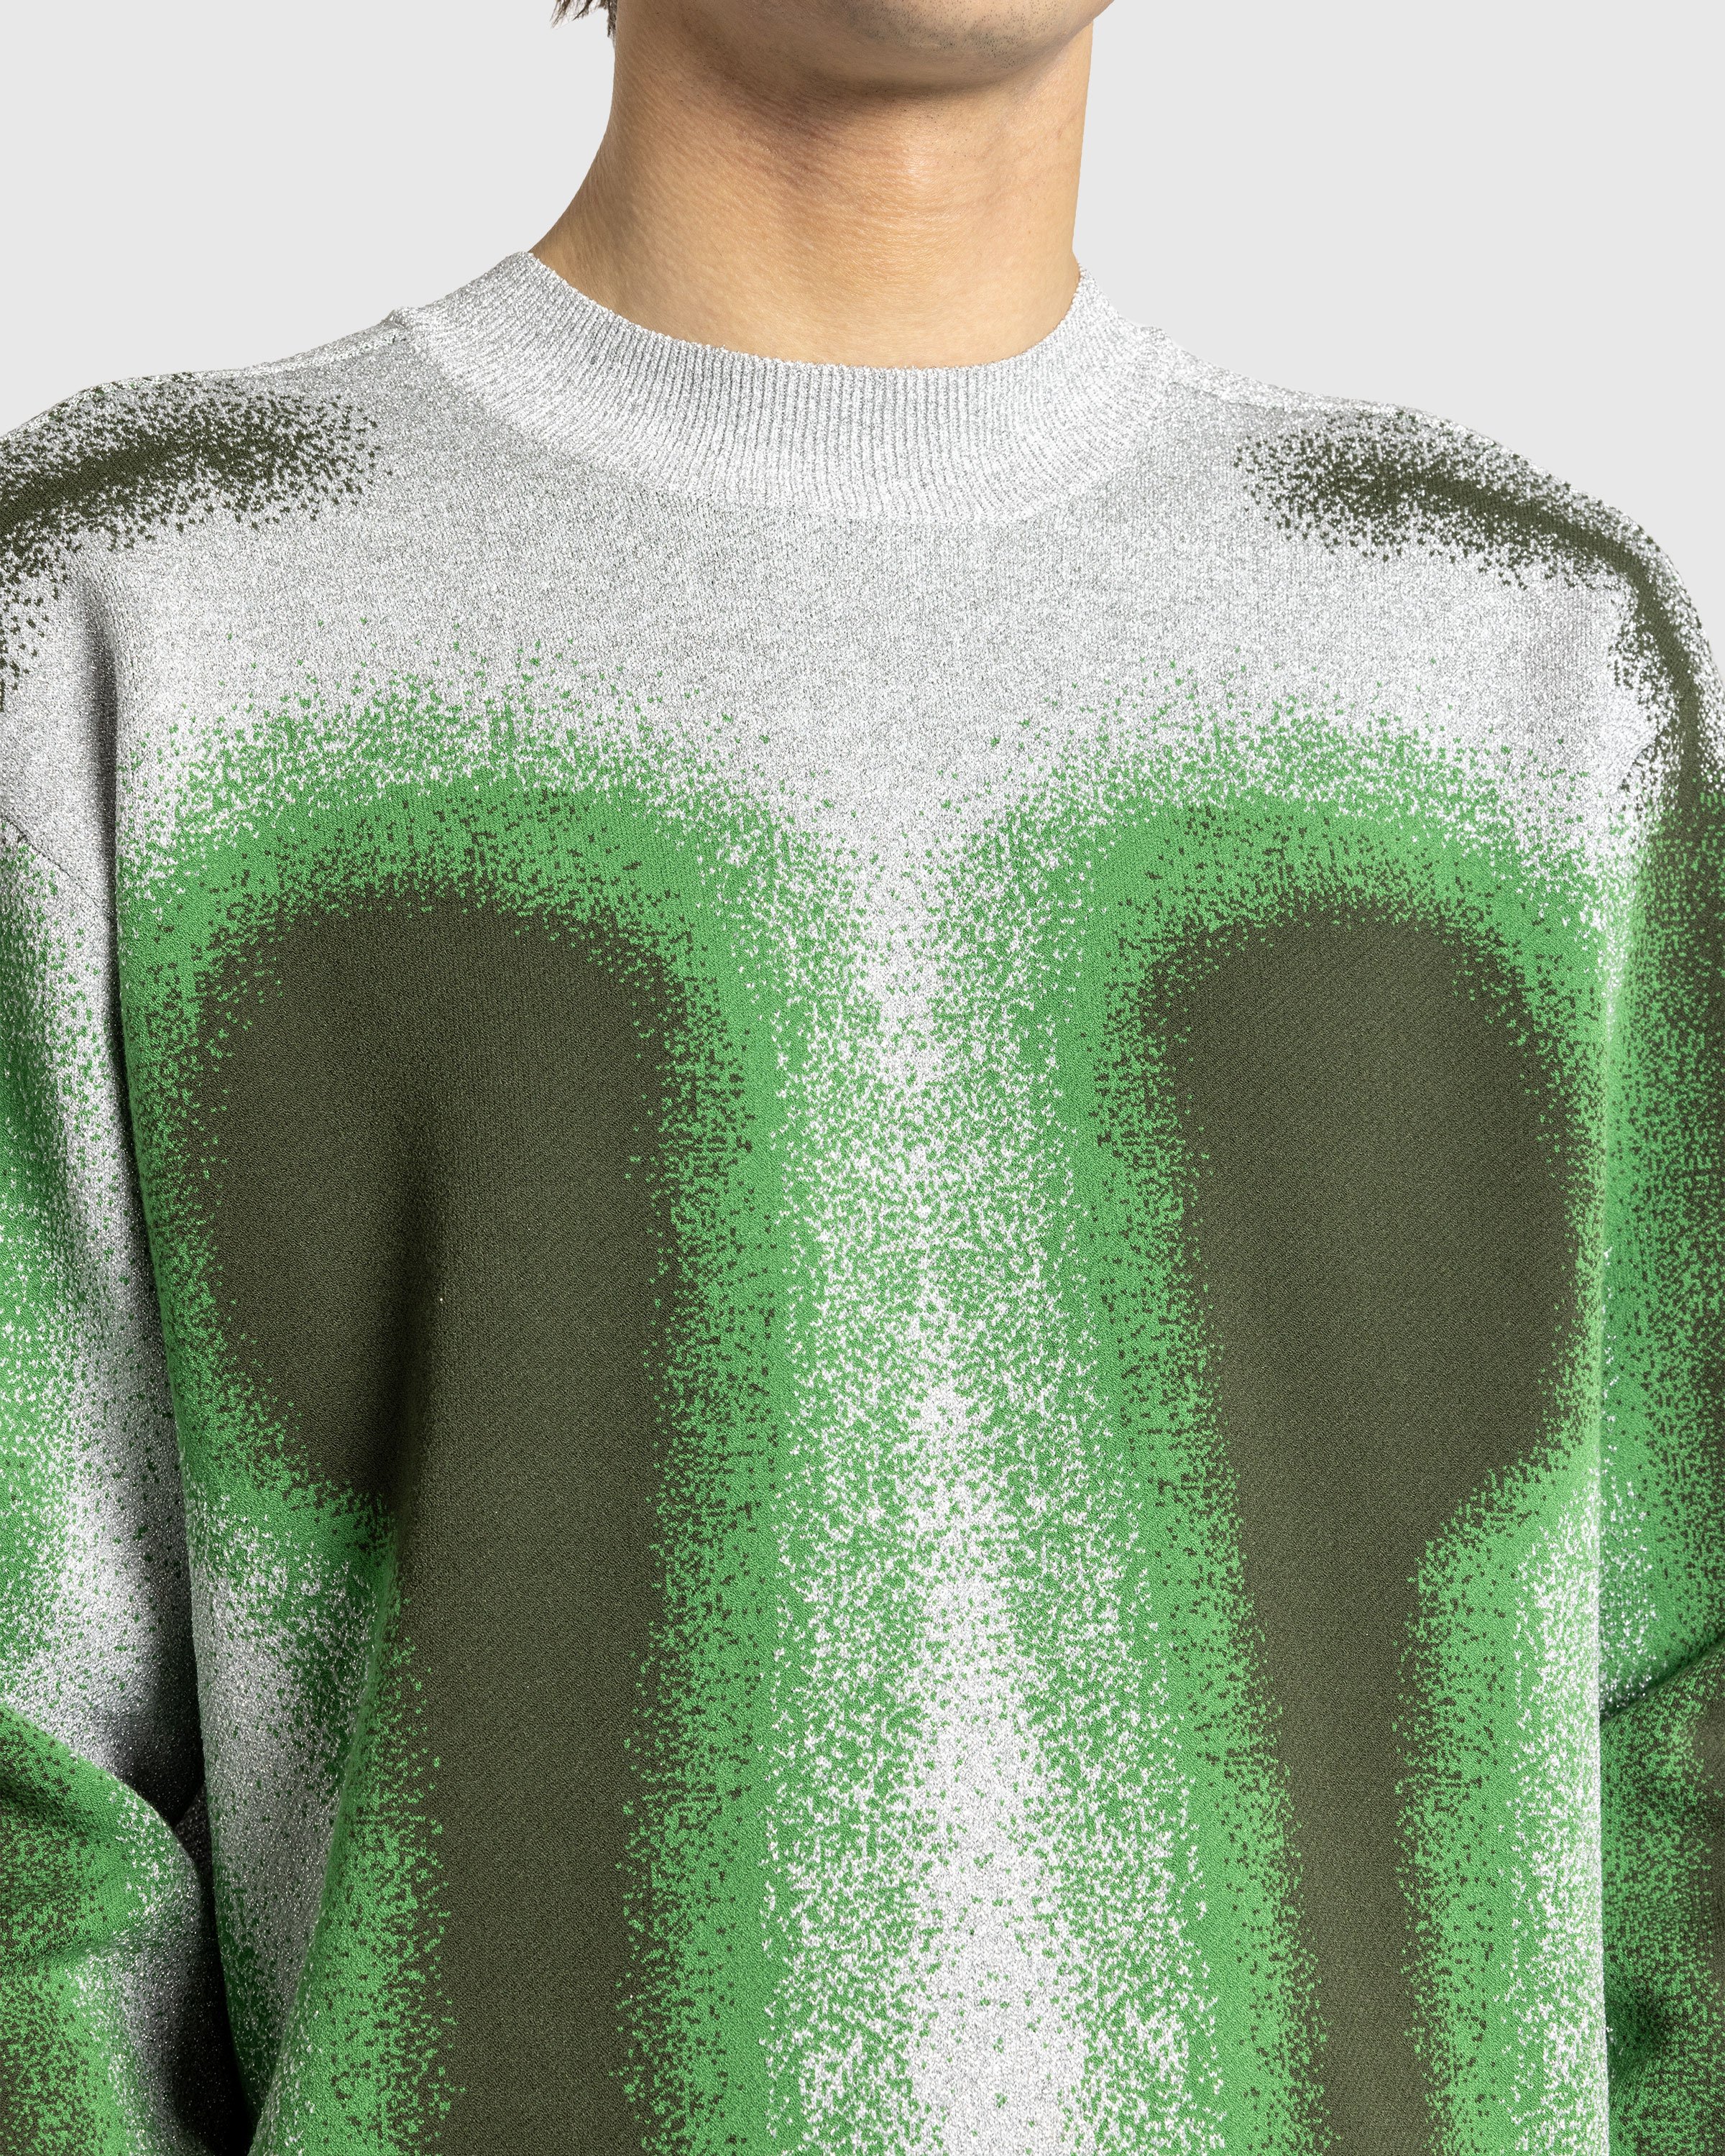 Y/Project - Gradient Knit Crew Neck Sweater Green - Clothing - Green - Image 5